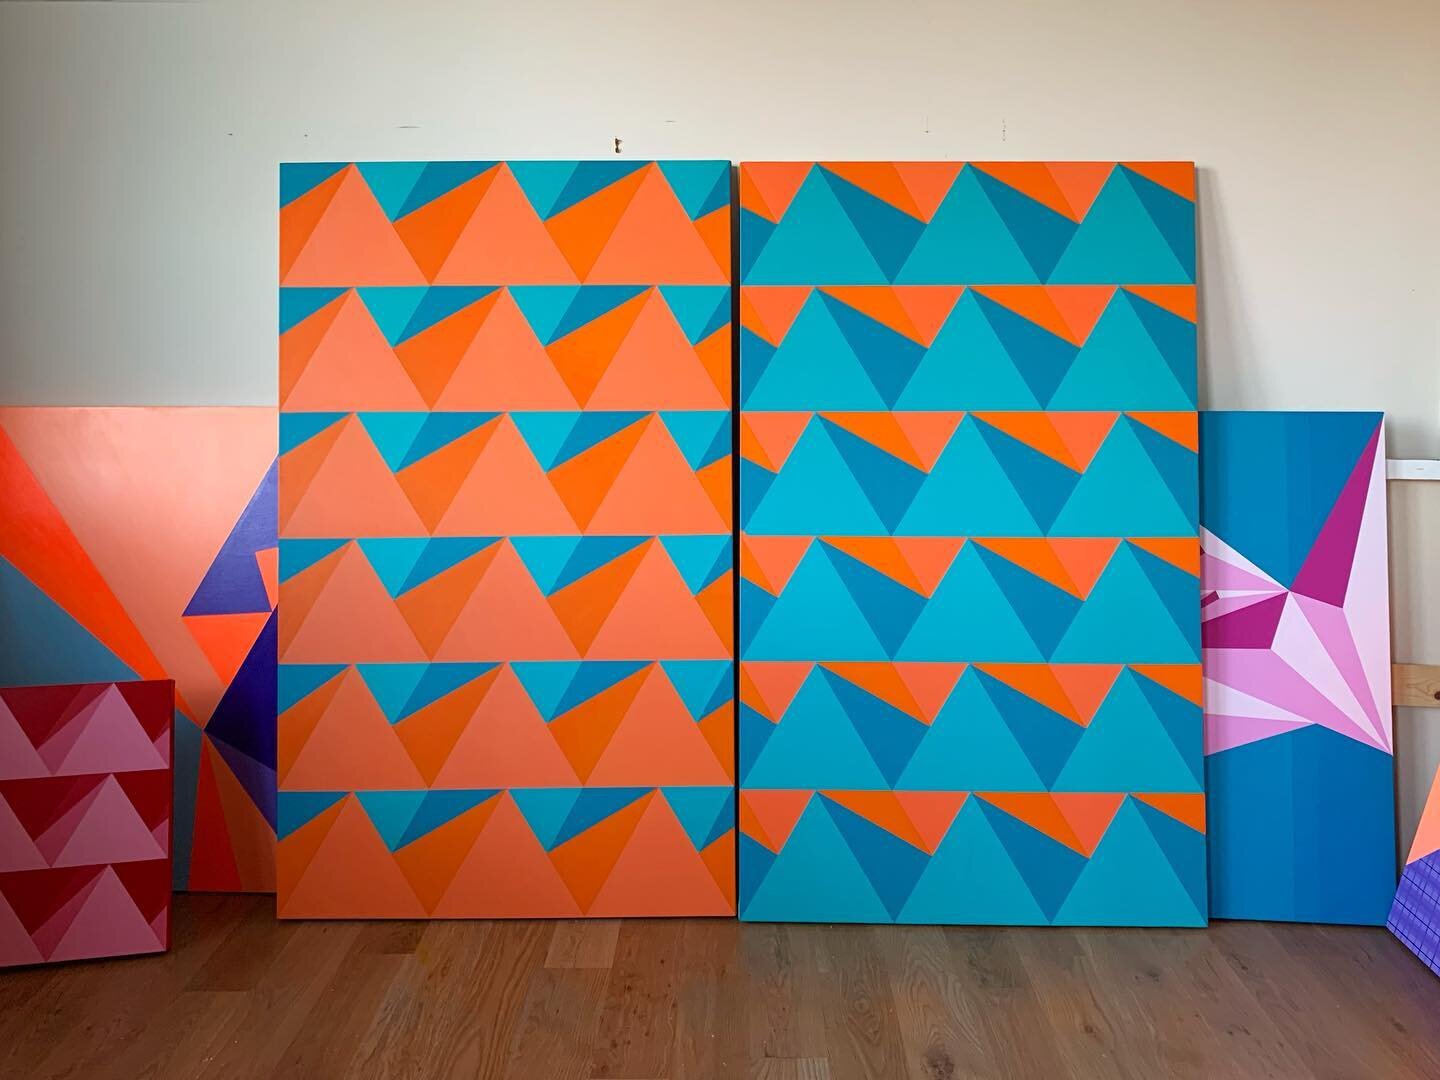 Things are coming along on this diptych. I&rsquo;m going to sit with these for a while to decide if they&rsquo;re finished. Each canvas is 36&rdquo;x 60&rdquo;. I hope these add a little brightness to your day!